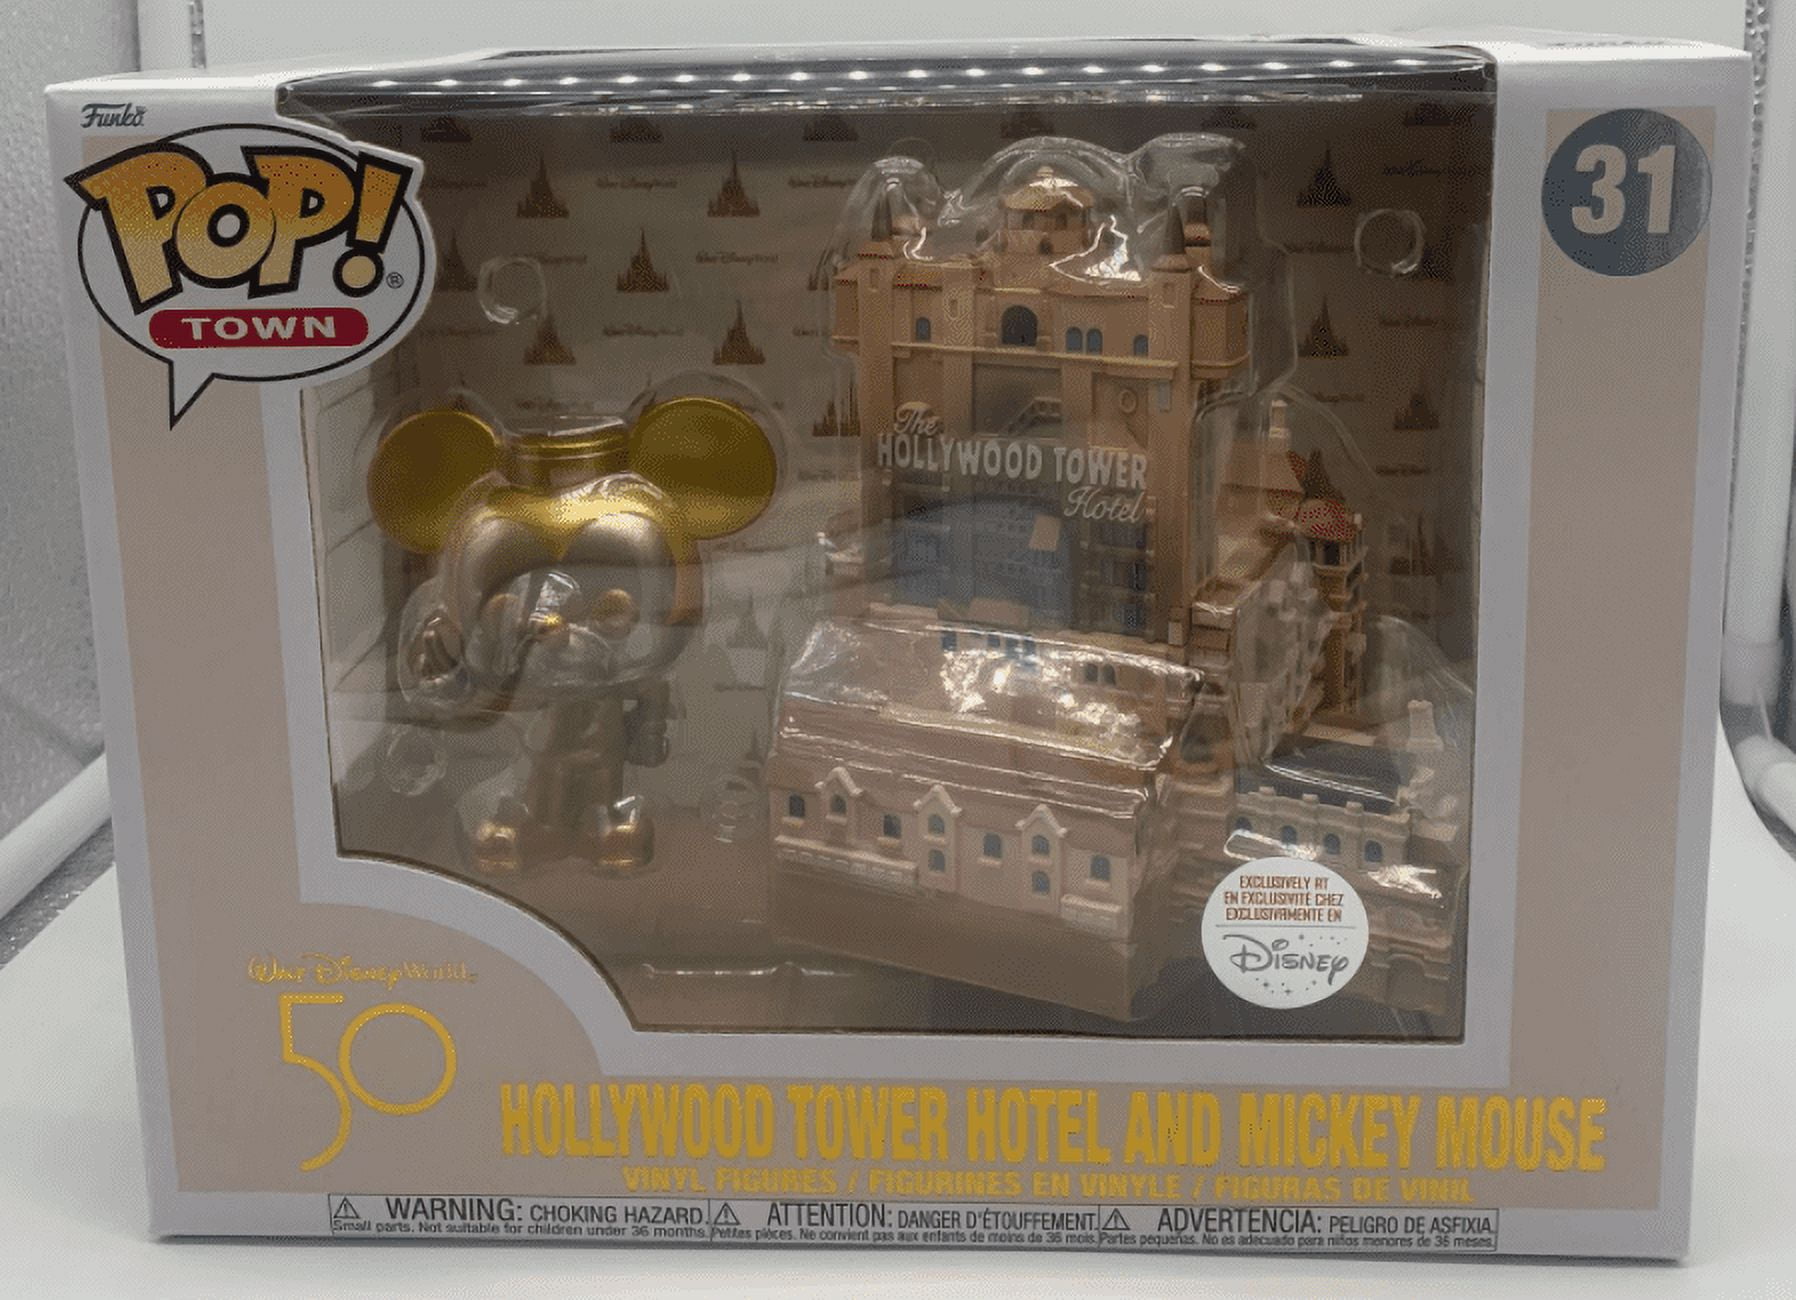 New Funko POP! 50th Anniversary Tower of Terror and Mickey Figure Set at  Walt Disney World - WDW News Today